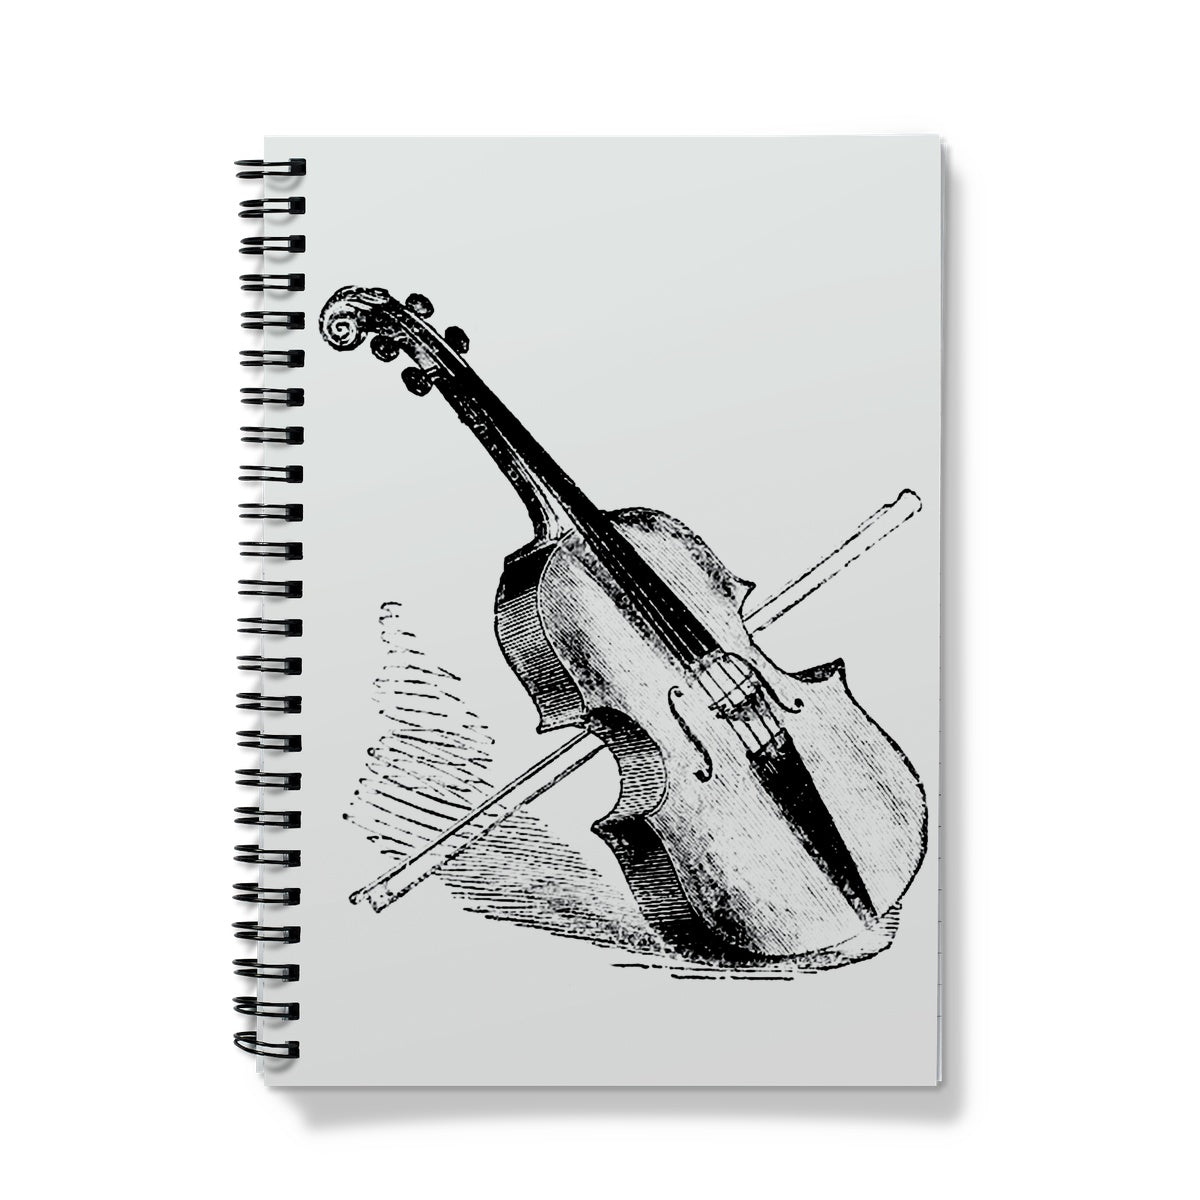 Fiddle and Bow Sketch Notebook